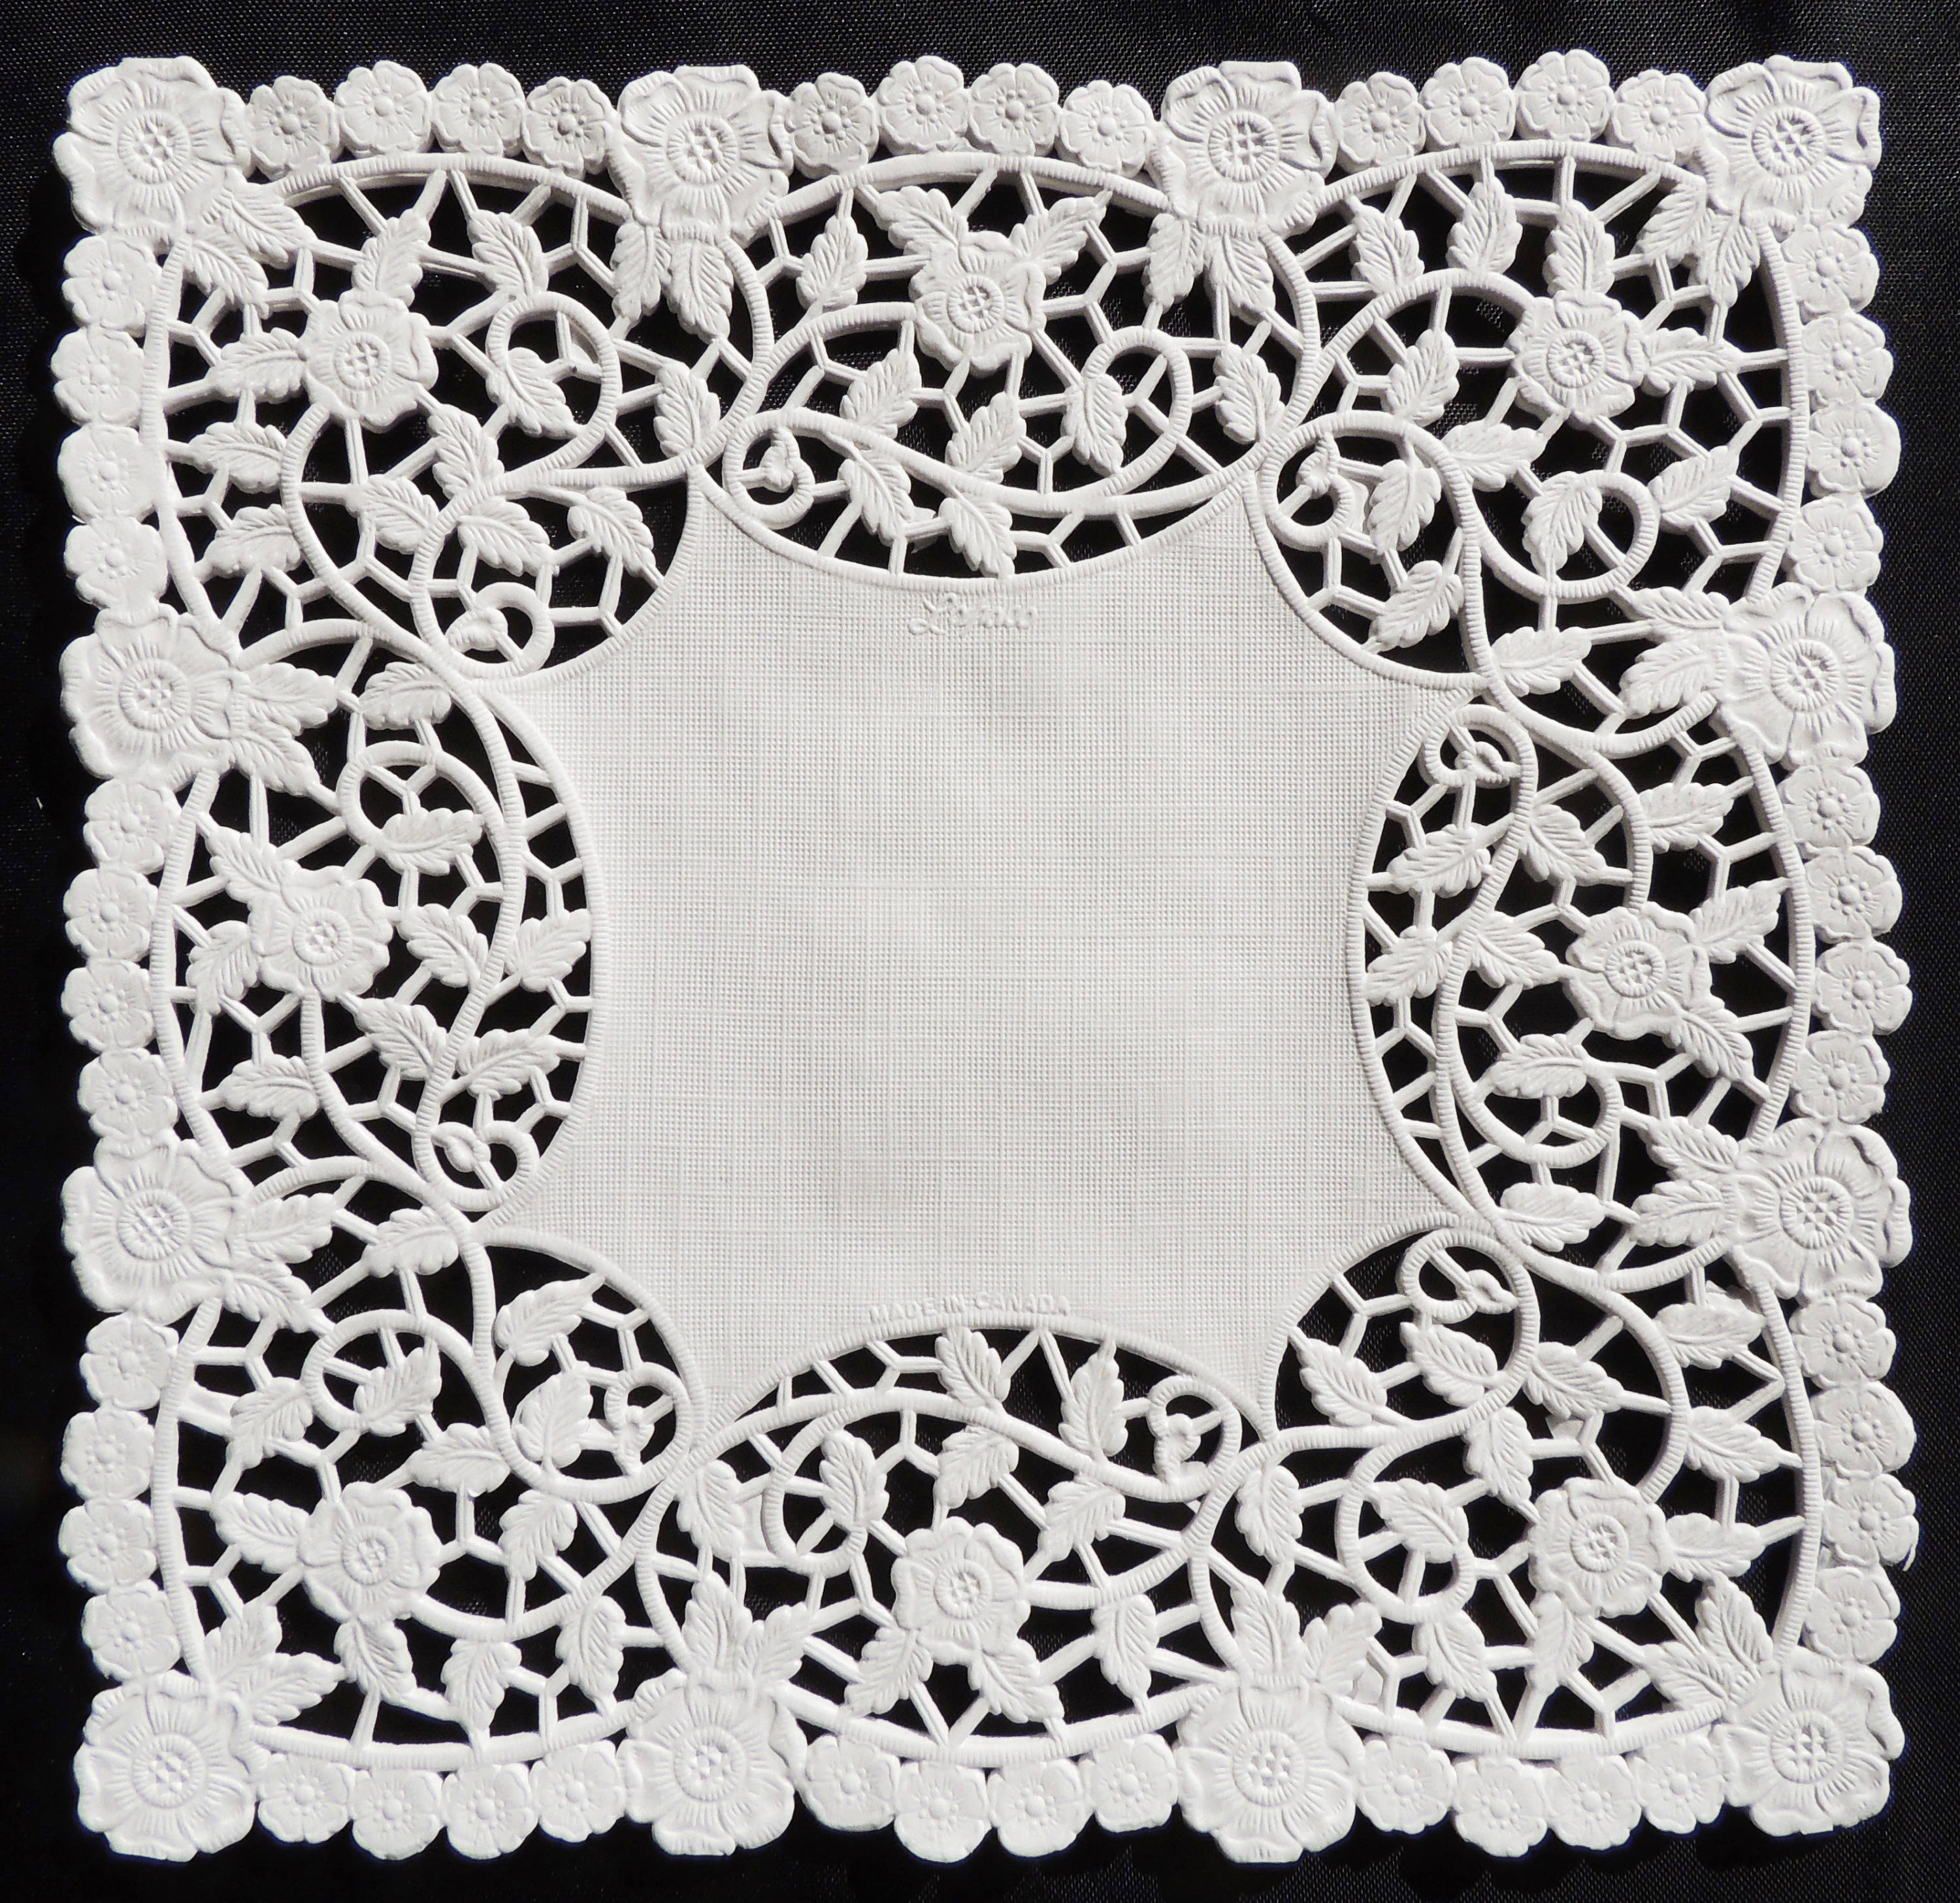 4 6 12 WHITE PAPER DOILIES Cambridge Round Lace Doily Paper Charger, Round  Placemats, Charger Plates, Invitation Doily 